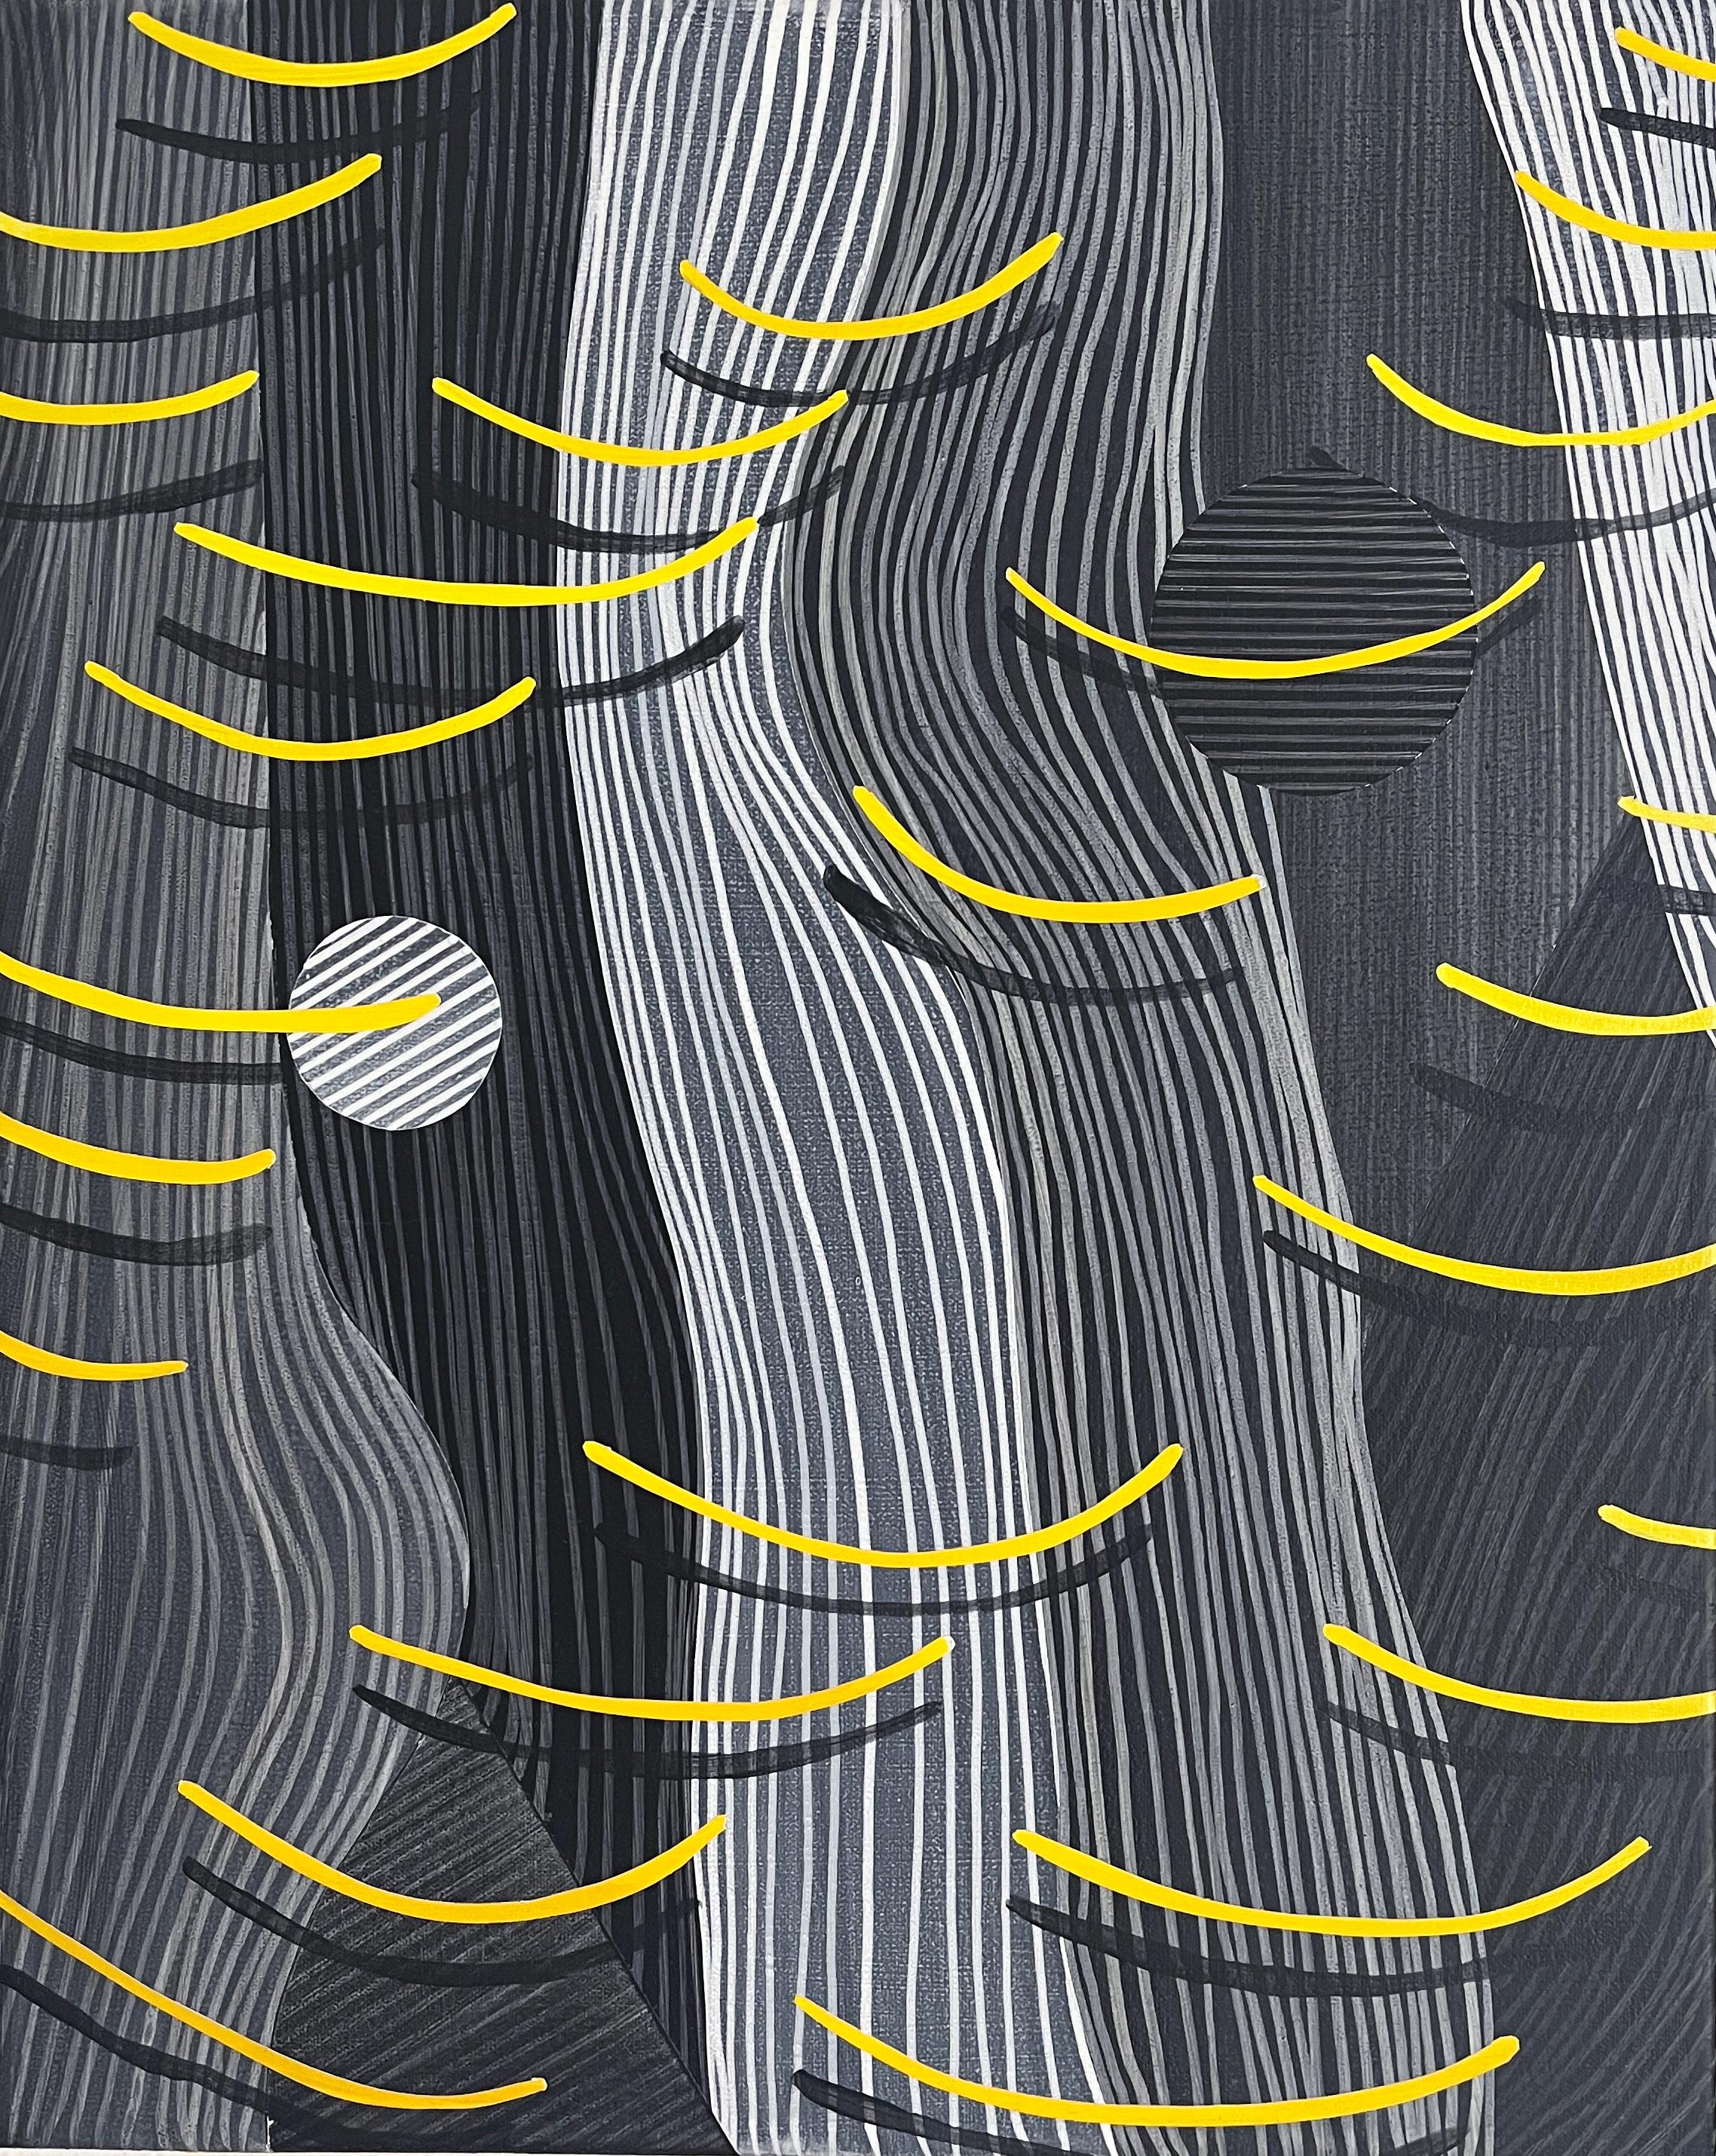 <p>Artist Comments<br>Rippling lines weave through a dark gray surface, with the two spheres and yellow curved strokes adding visual intrigue to the composition. The artwork represents a dialogue between imagination and breaking through the limiting